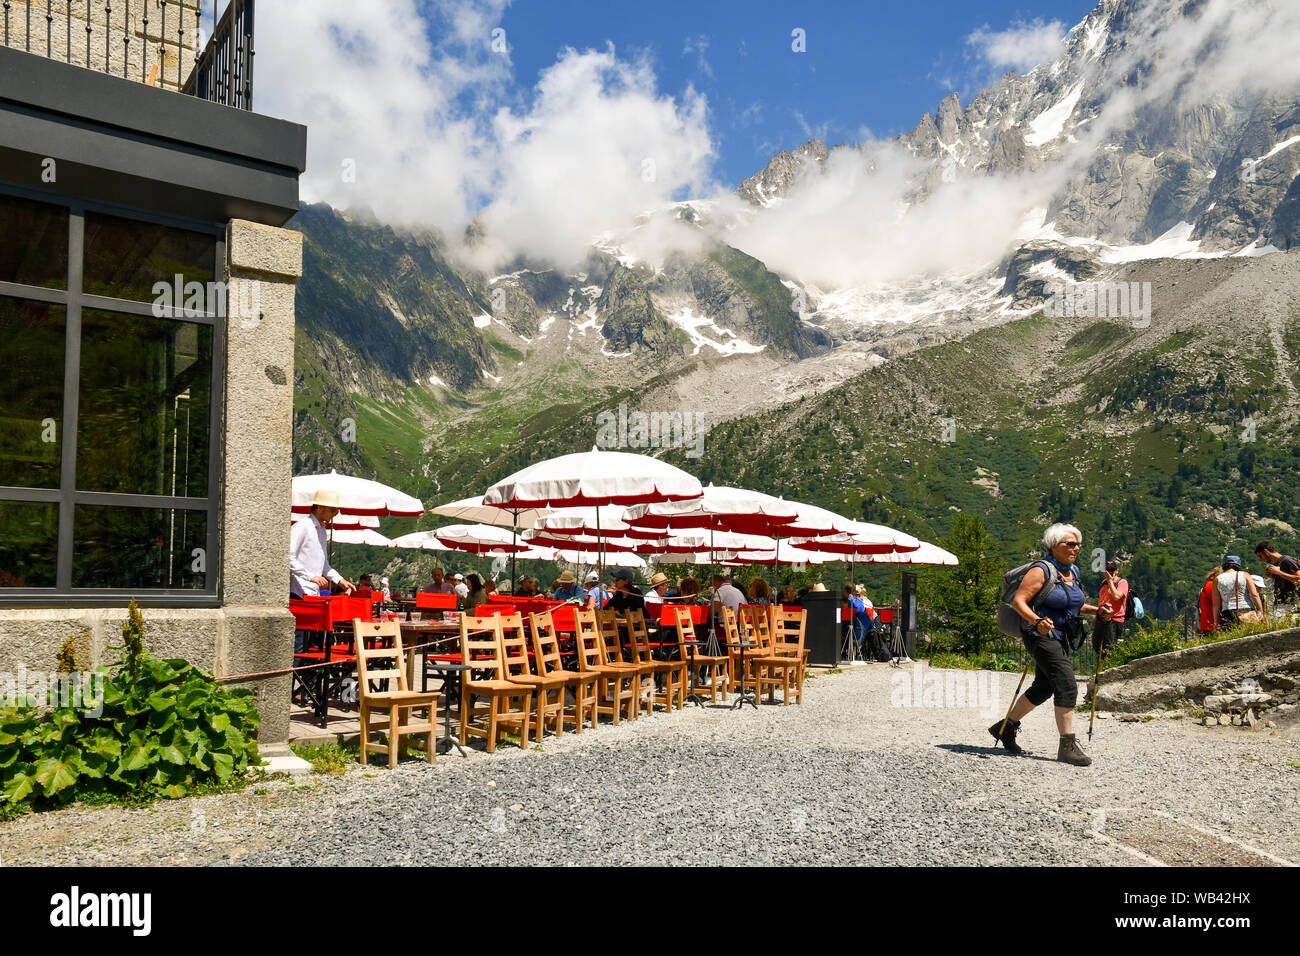 Outdoor café of Refuge of Montenvers with tourists, an elderly lady doing Nordic walking and Aiguilles du Dru mountain, Chamonix-Mont-Blanc, France Stock Photo